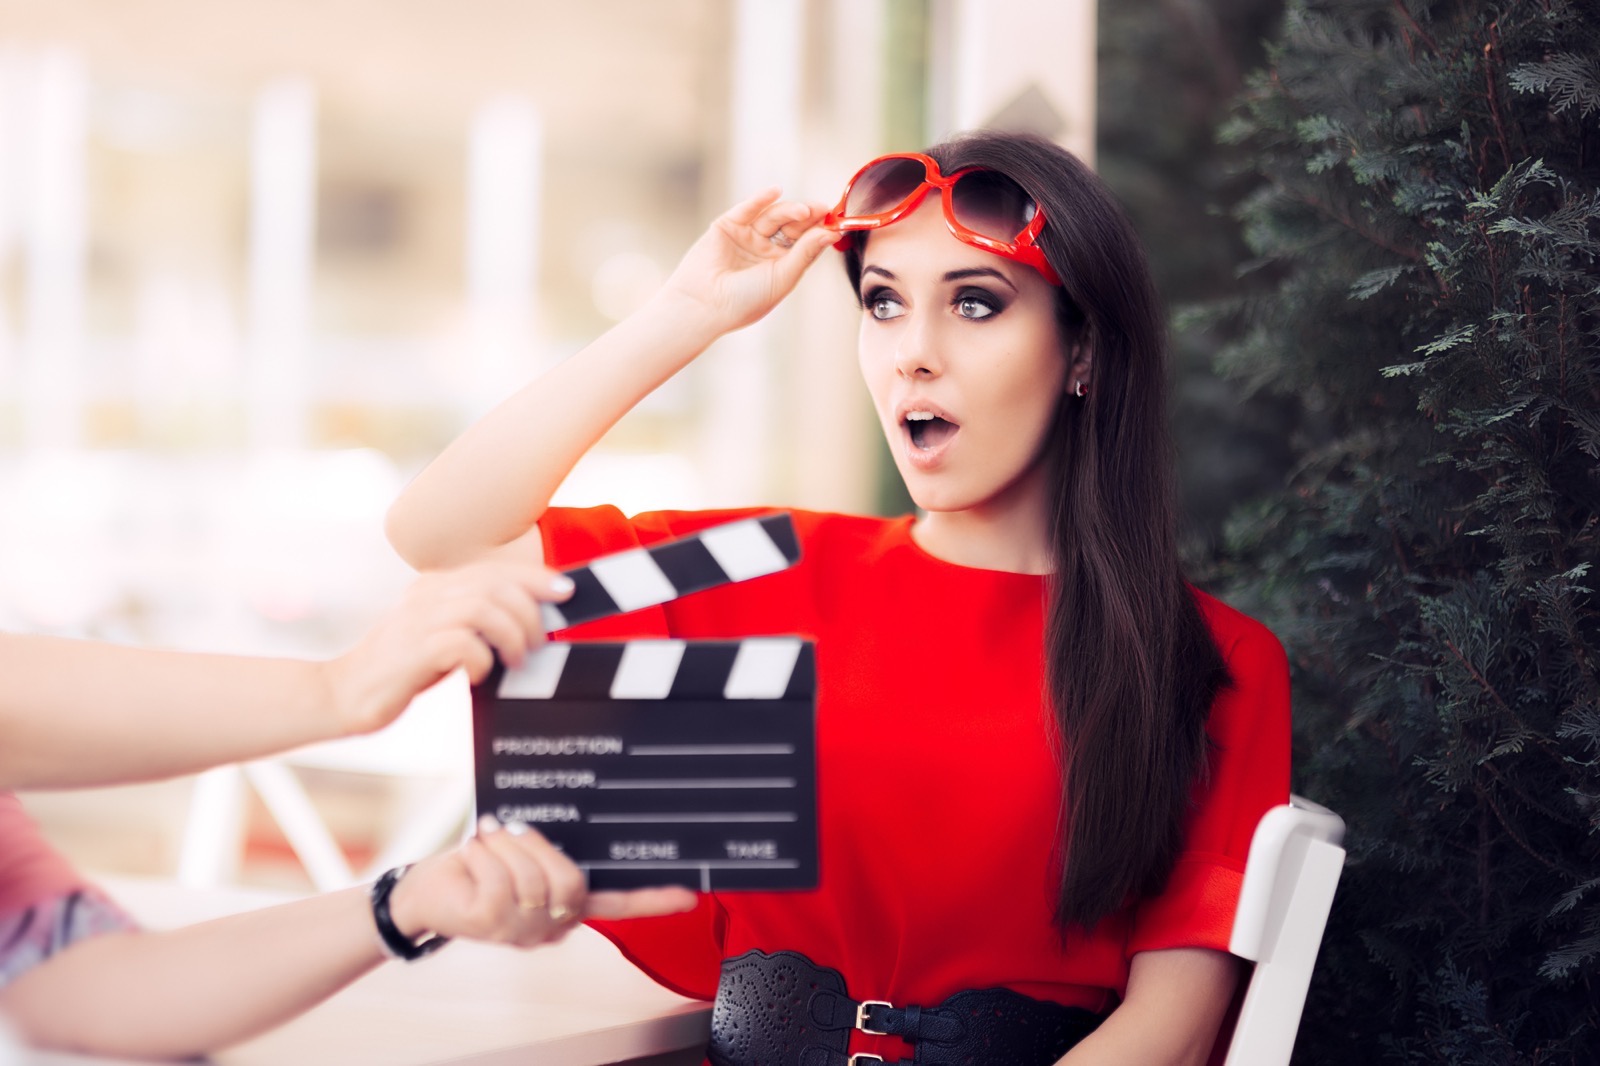 Fun Words Surprised Actress with Oversized Sunglasses Shooting Movie Scene